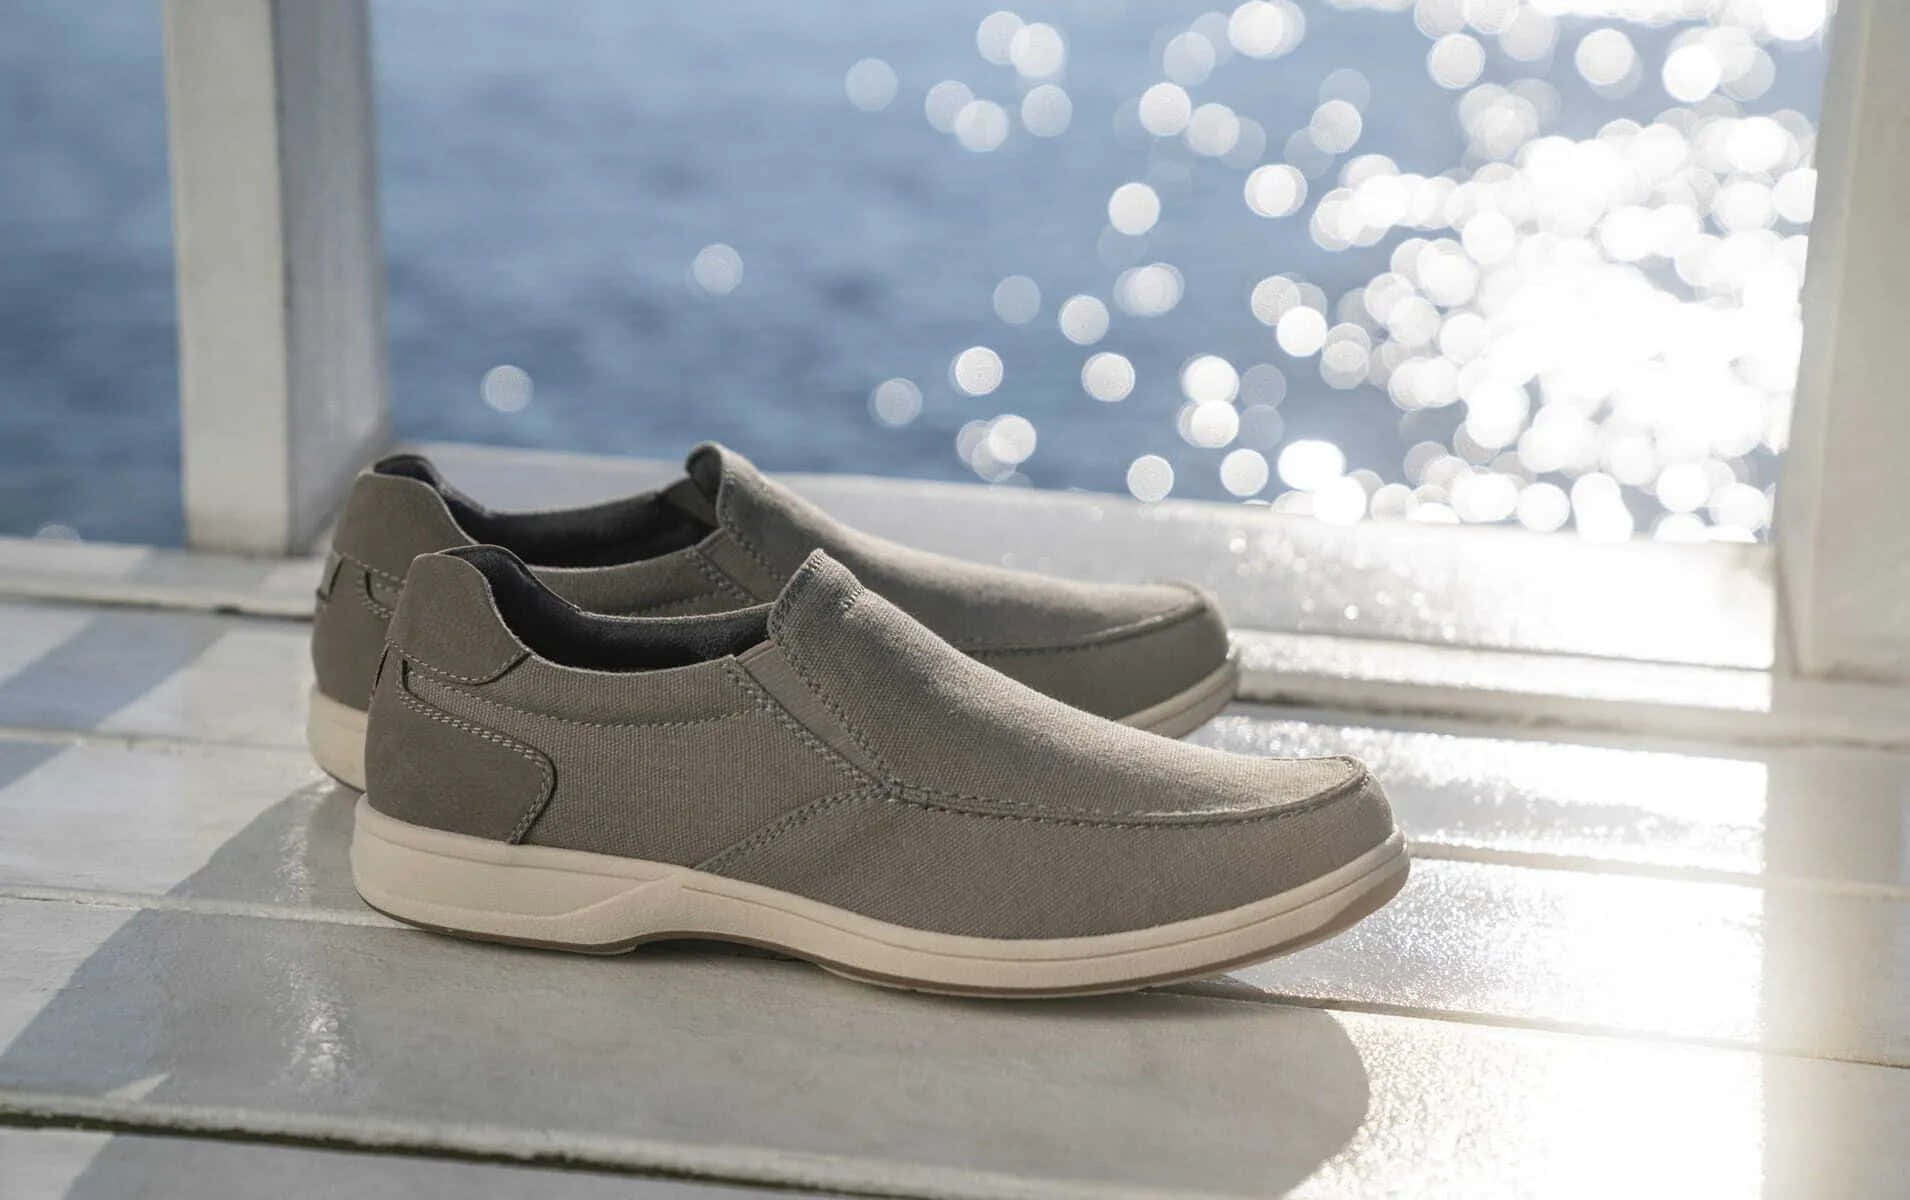 A Pair Of Grey Slip On Shoes On A Wooden Deck